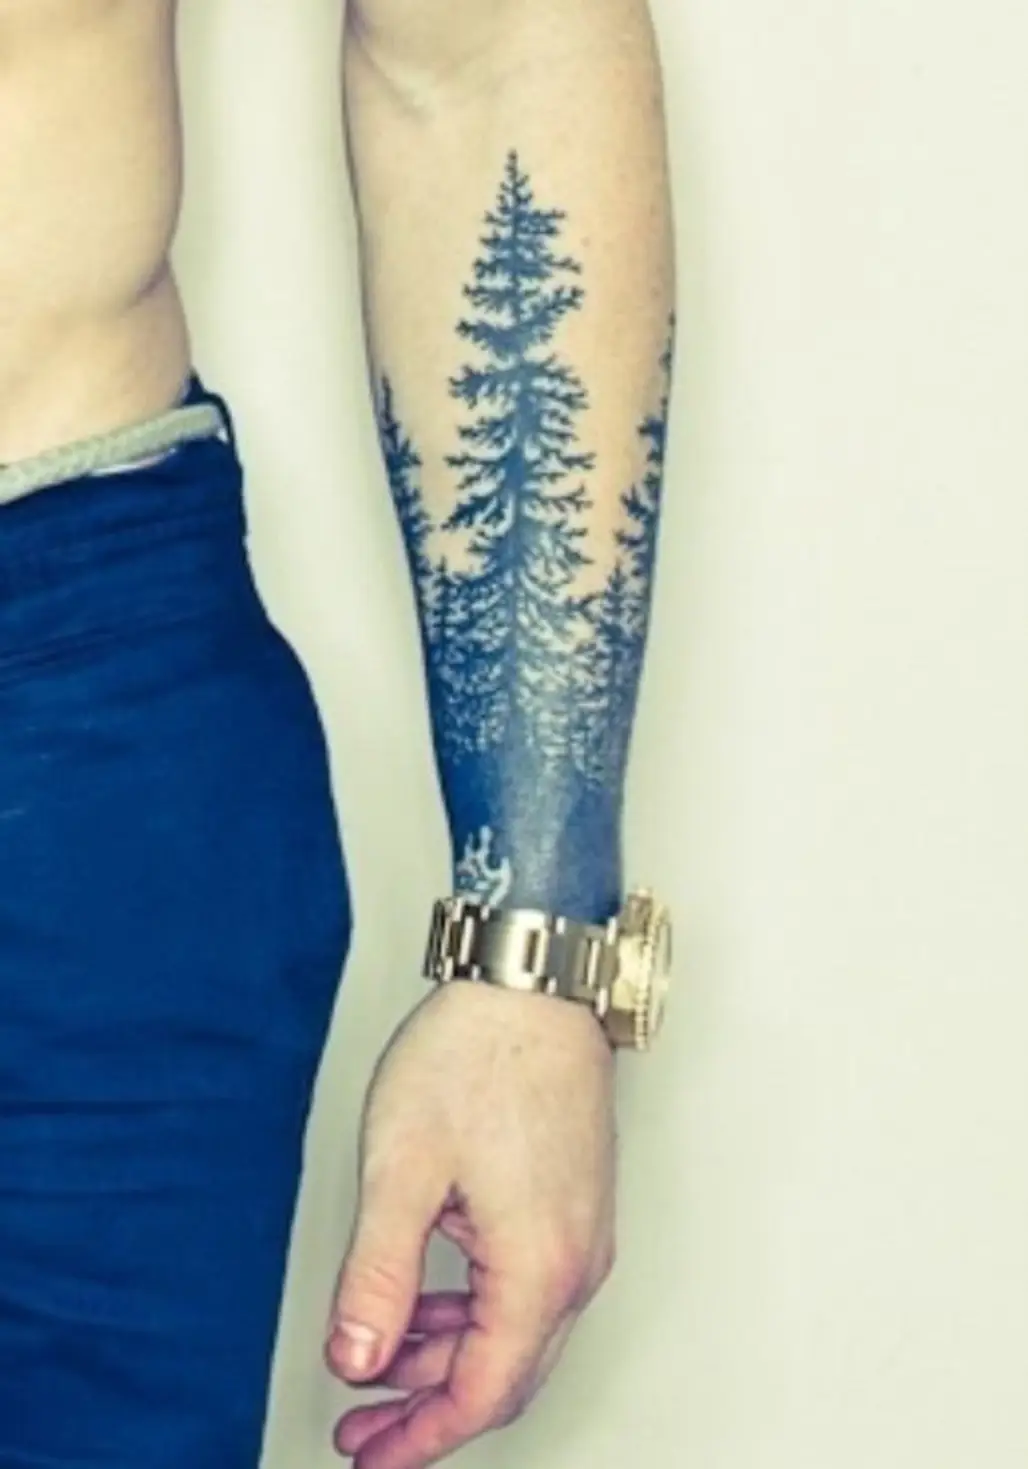 Or This Half Sleeve